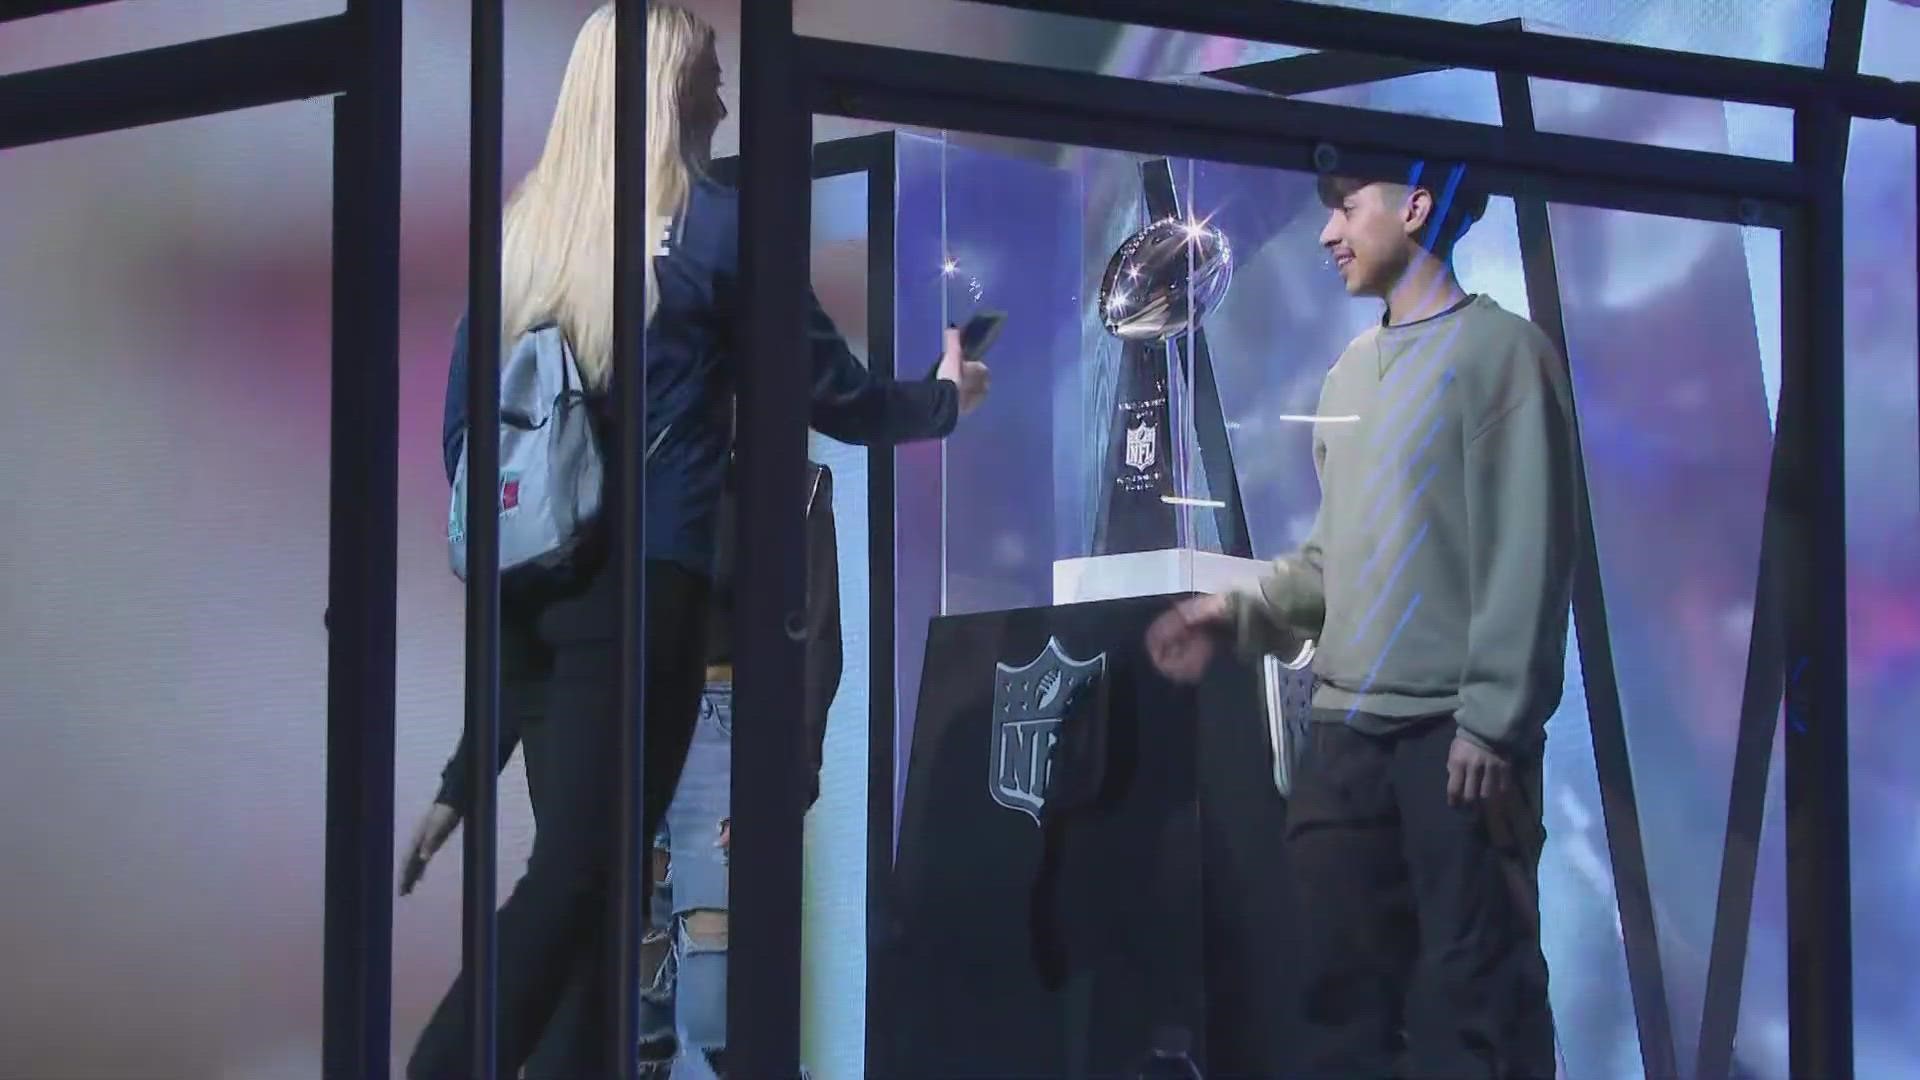 The Super Bowl Experience is open for fans to attend at the Phoenix Convention Center.